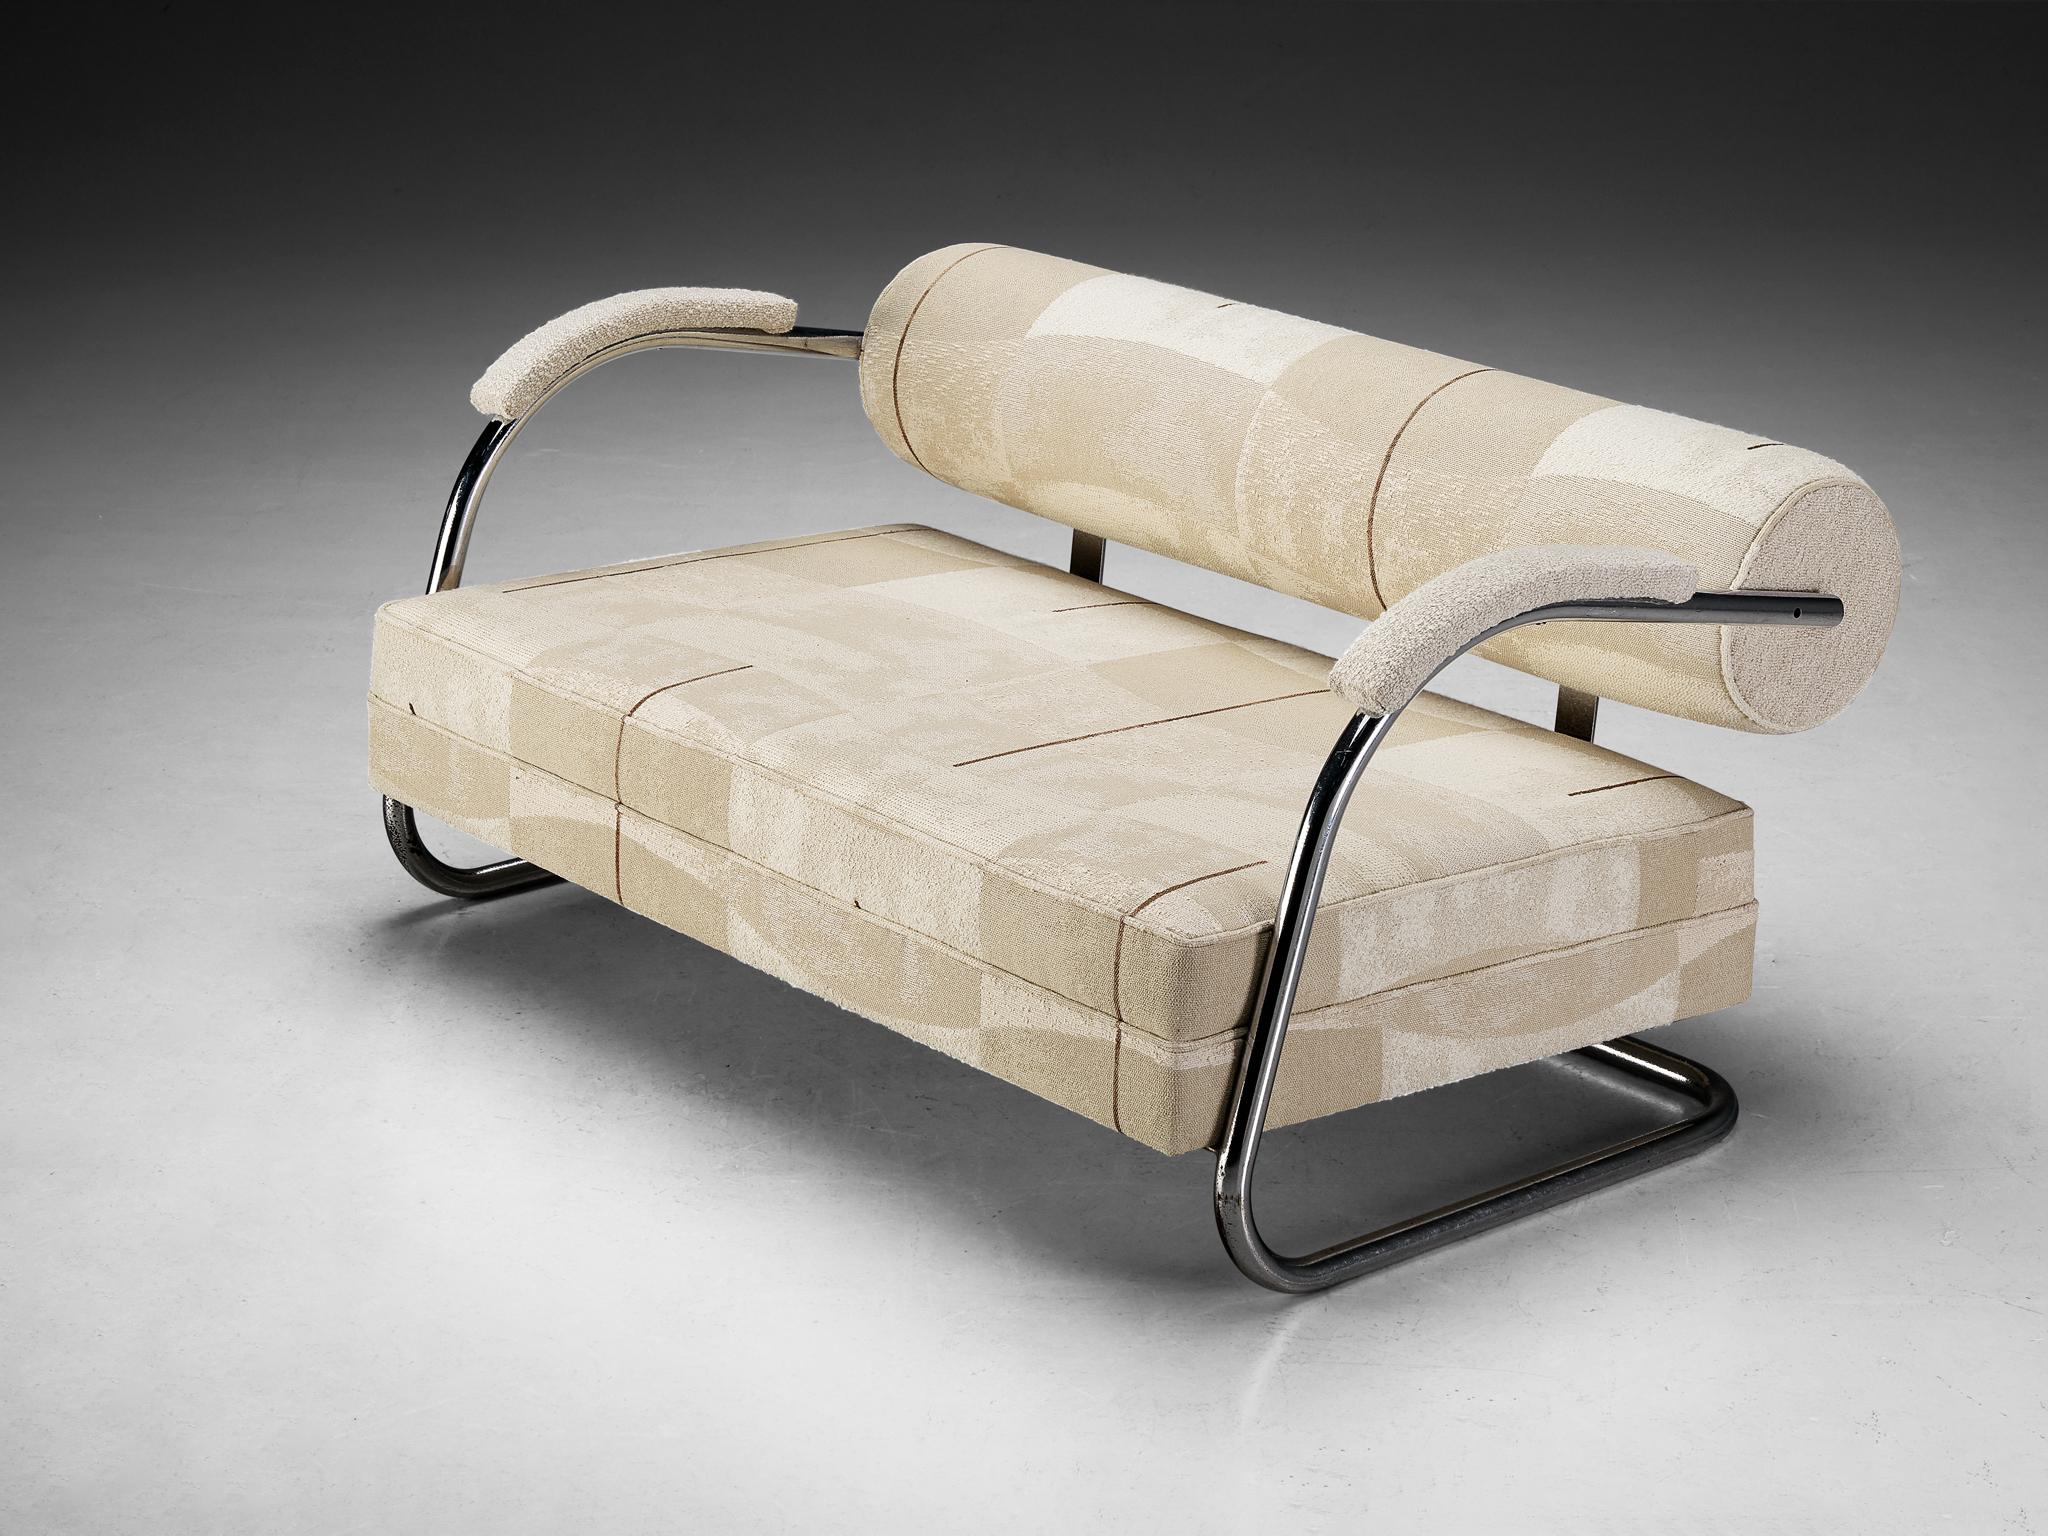 Sofa, fabric by Larsen, chrome-plated metal, Northern Europe, 1930s

This sofa is designed according to the principles of the Bauhaus Movement. The design features a tubular frame executed in chromed metal and features striking lines and round